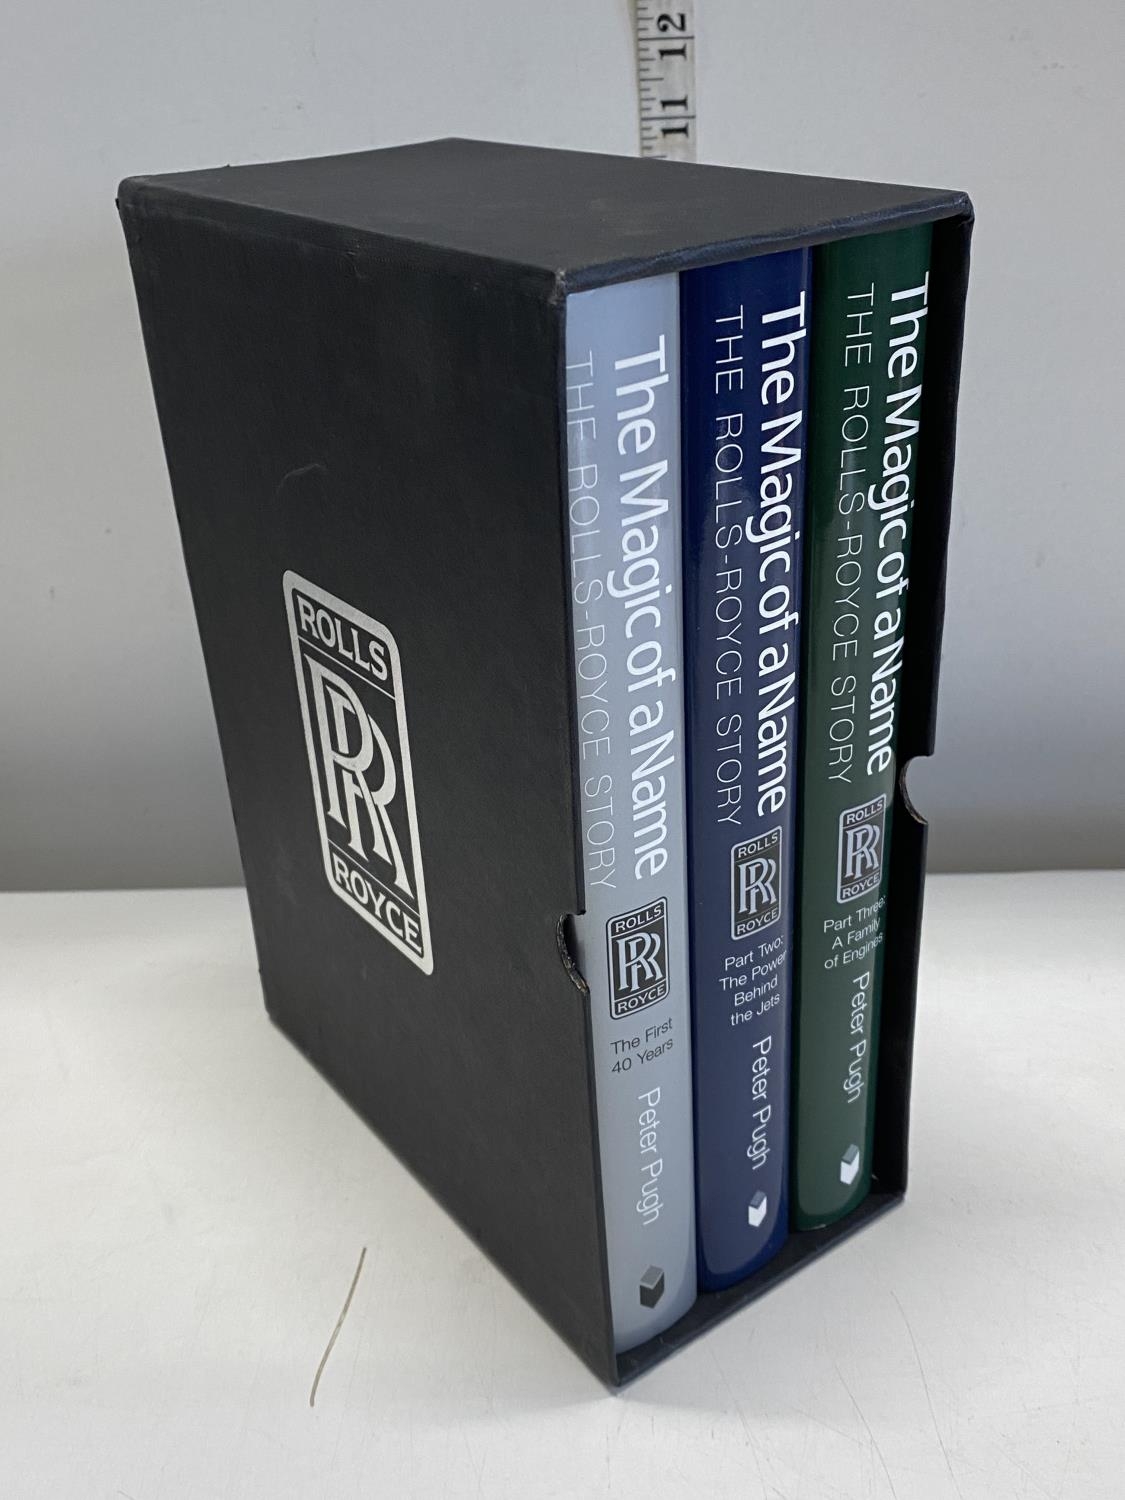 Three box set 'The Magic of The Name, The Rolls Royce Story' by Peter Pugh